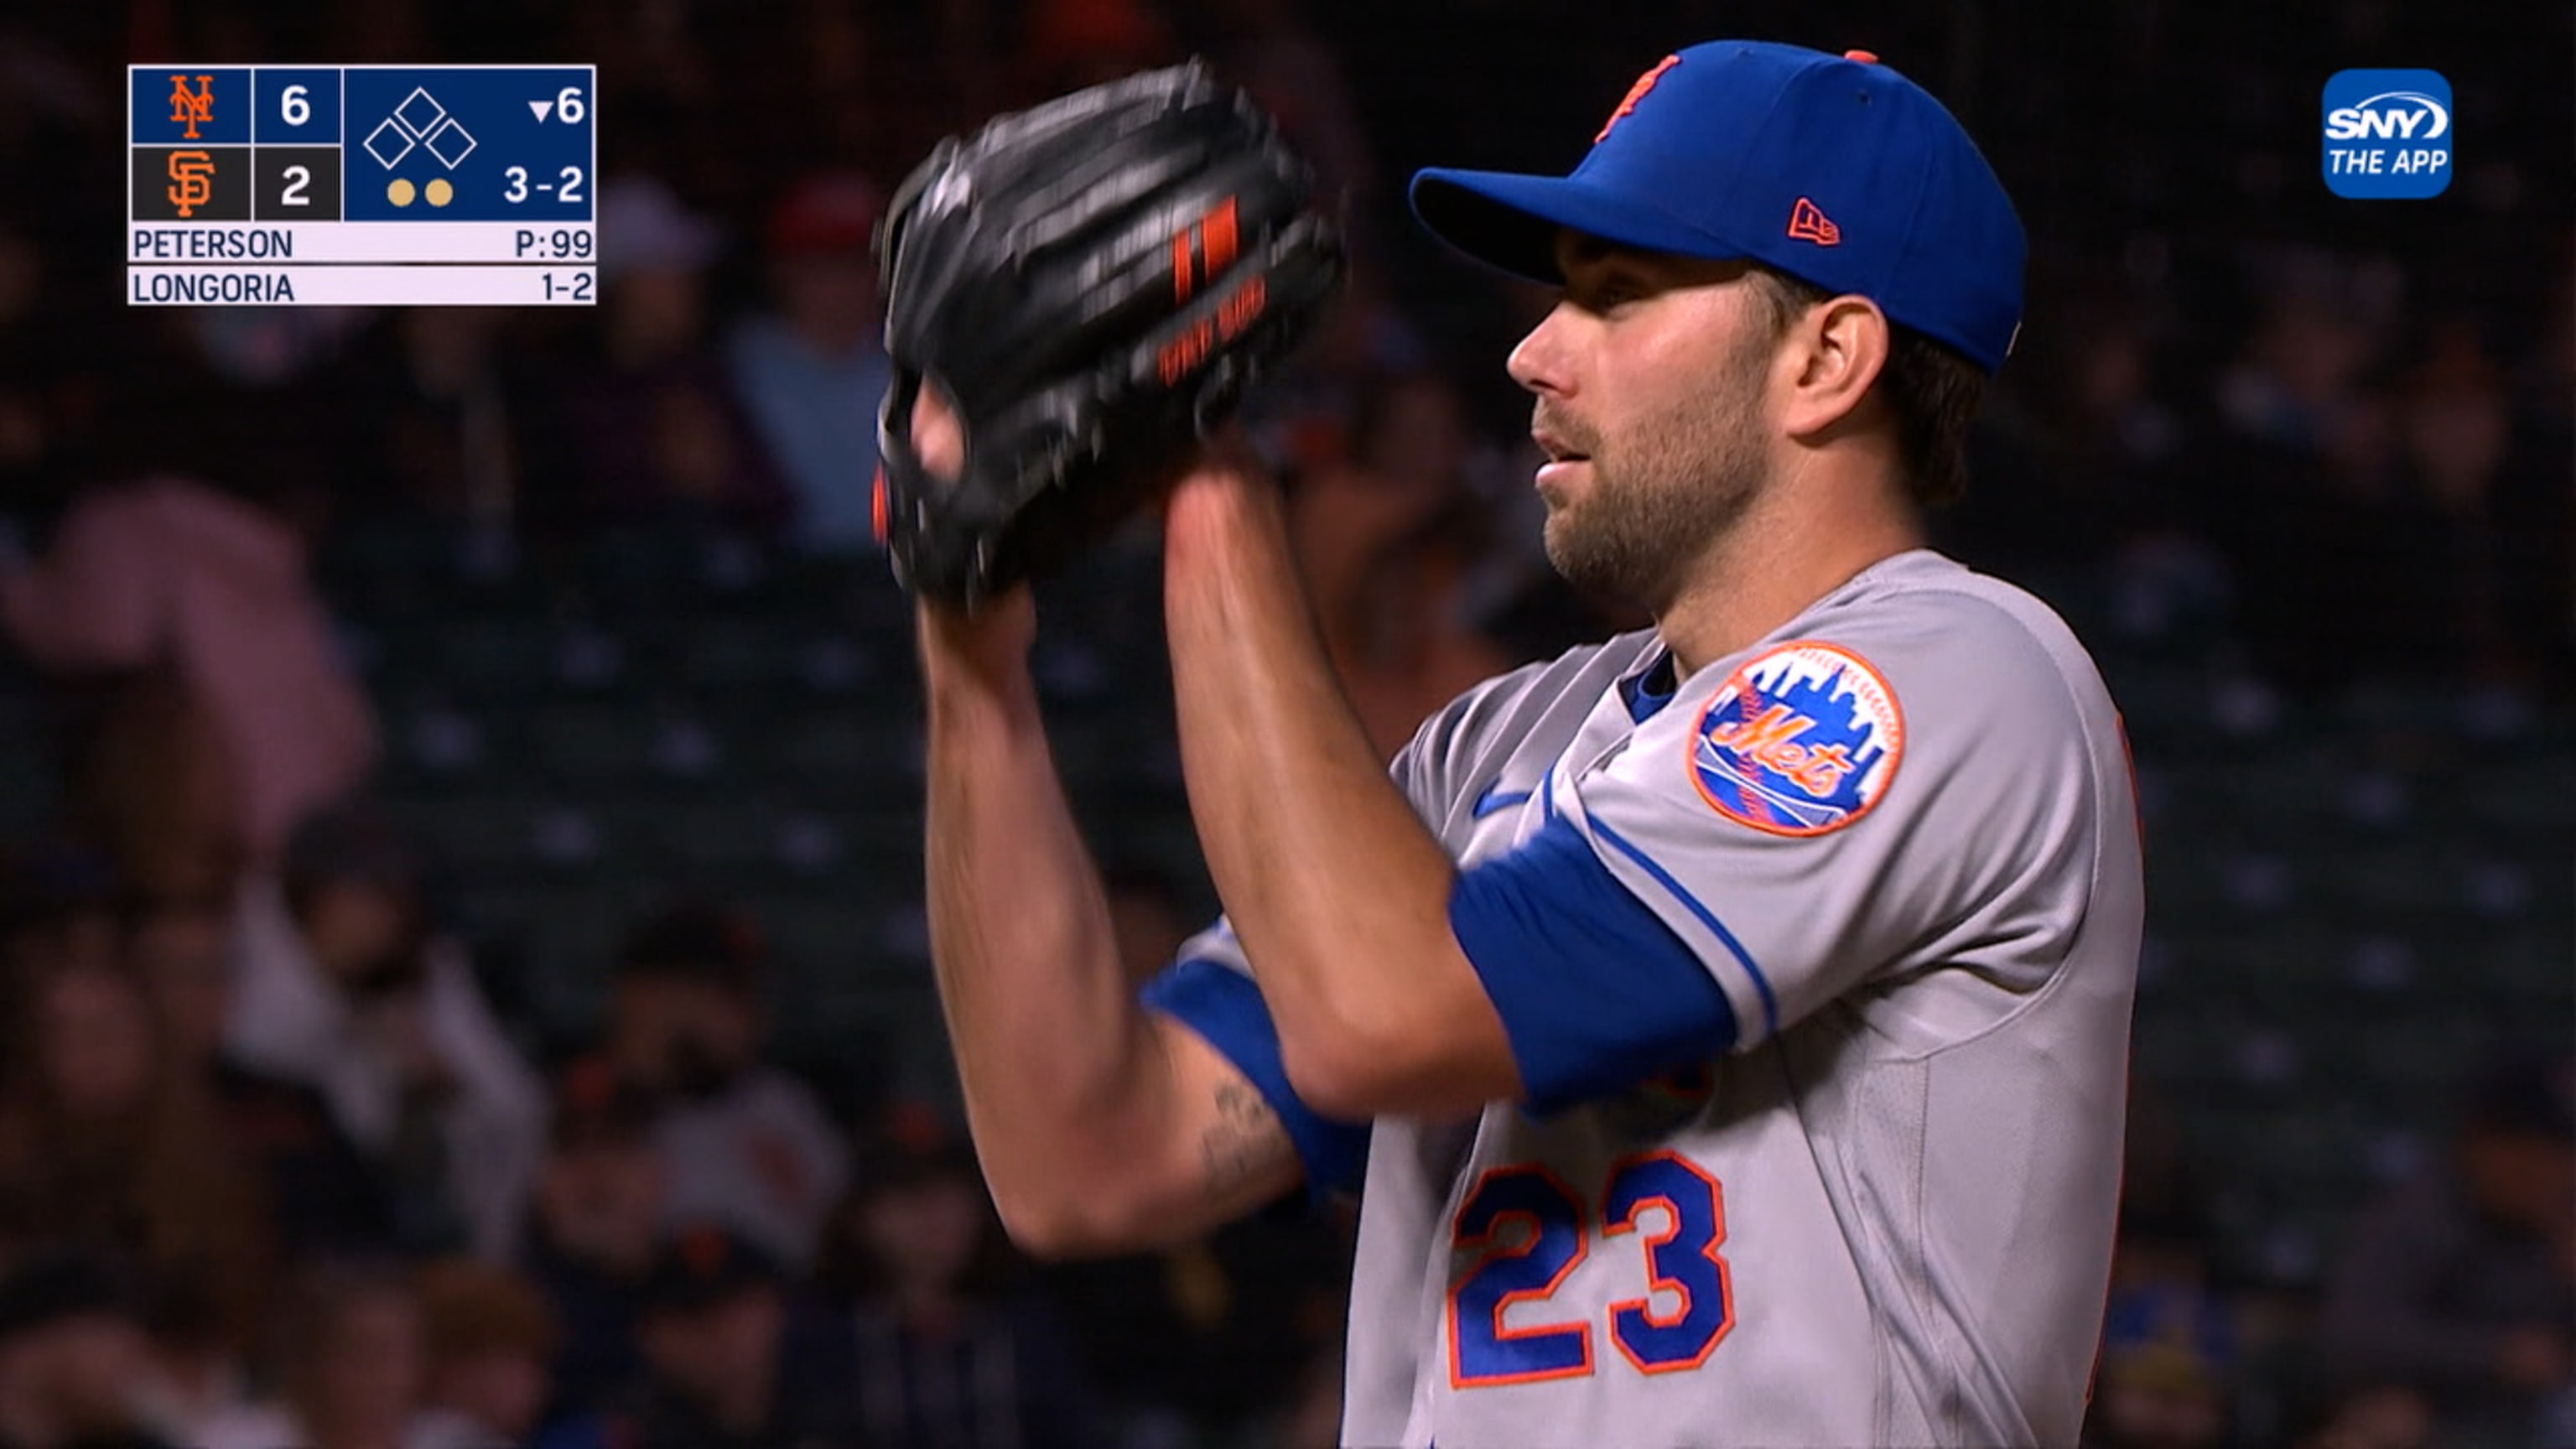 Alonso, Mets power up to pound Giants